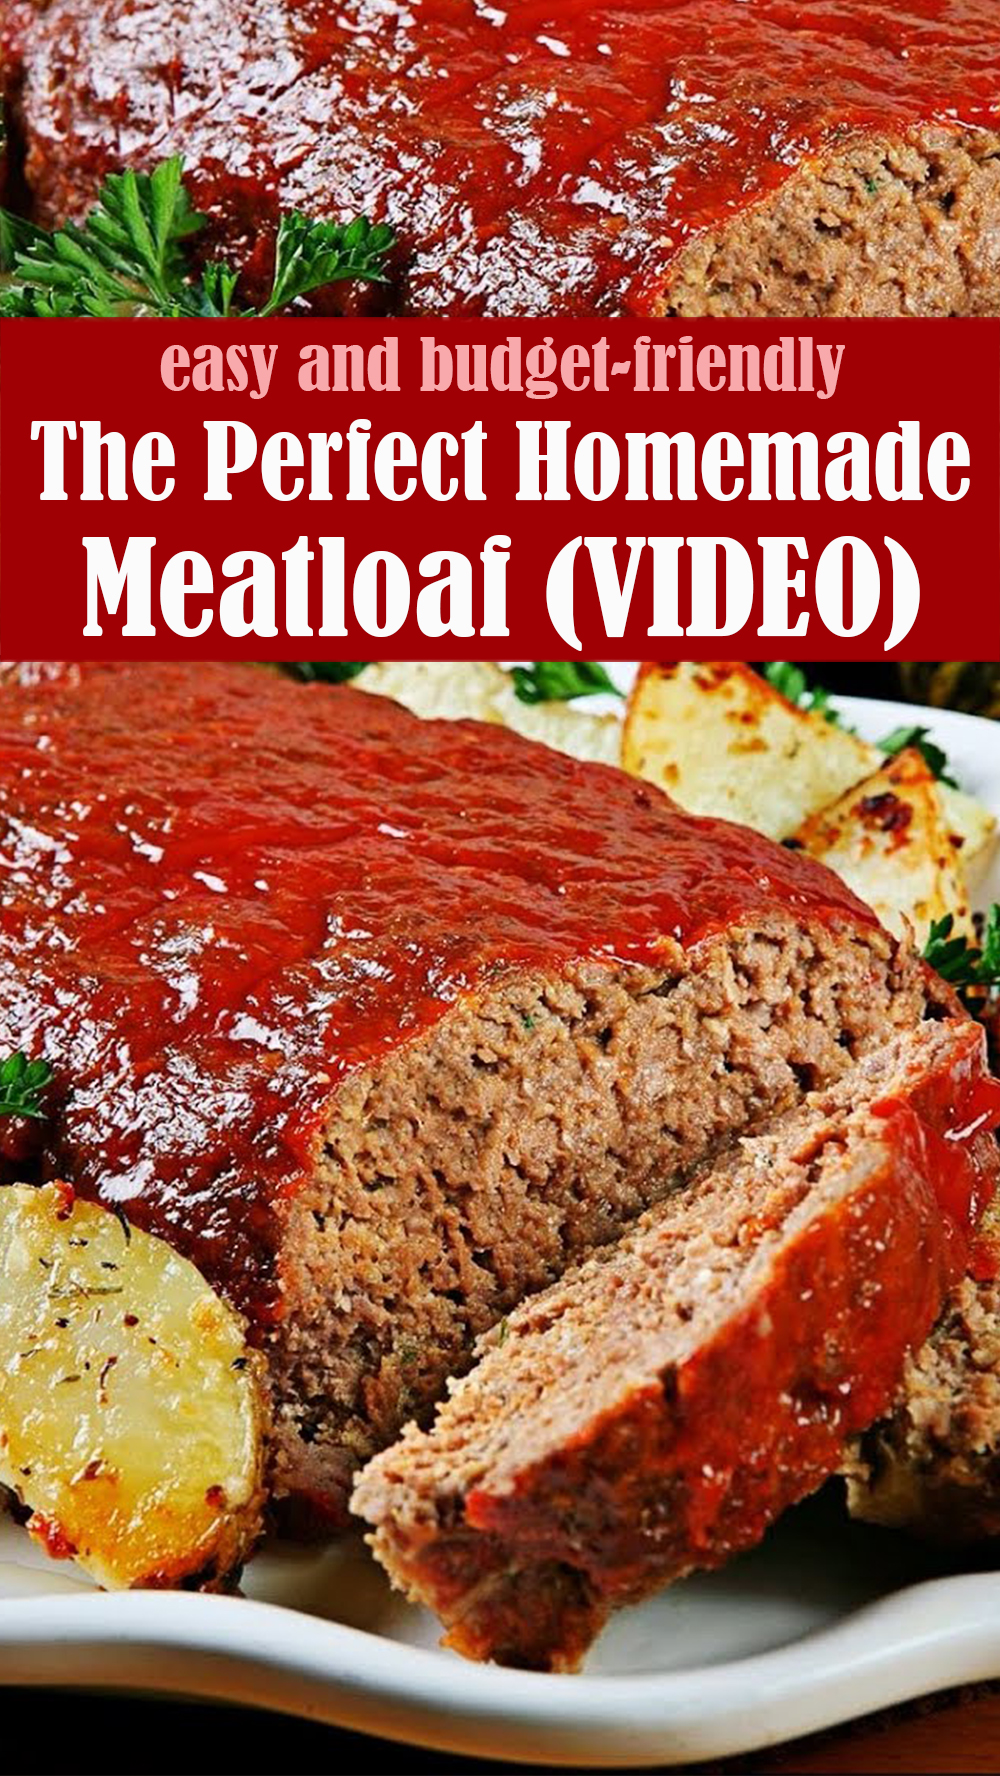 The Perfect Homemade Meatloaf Recipe